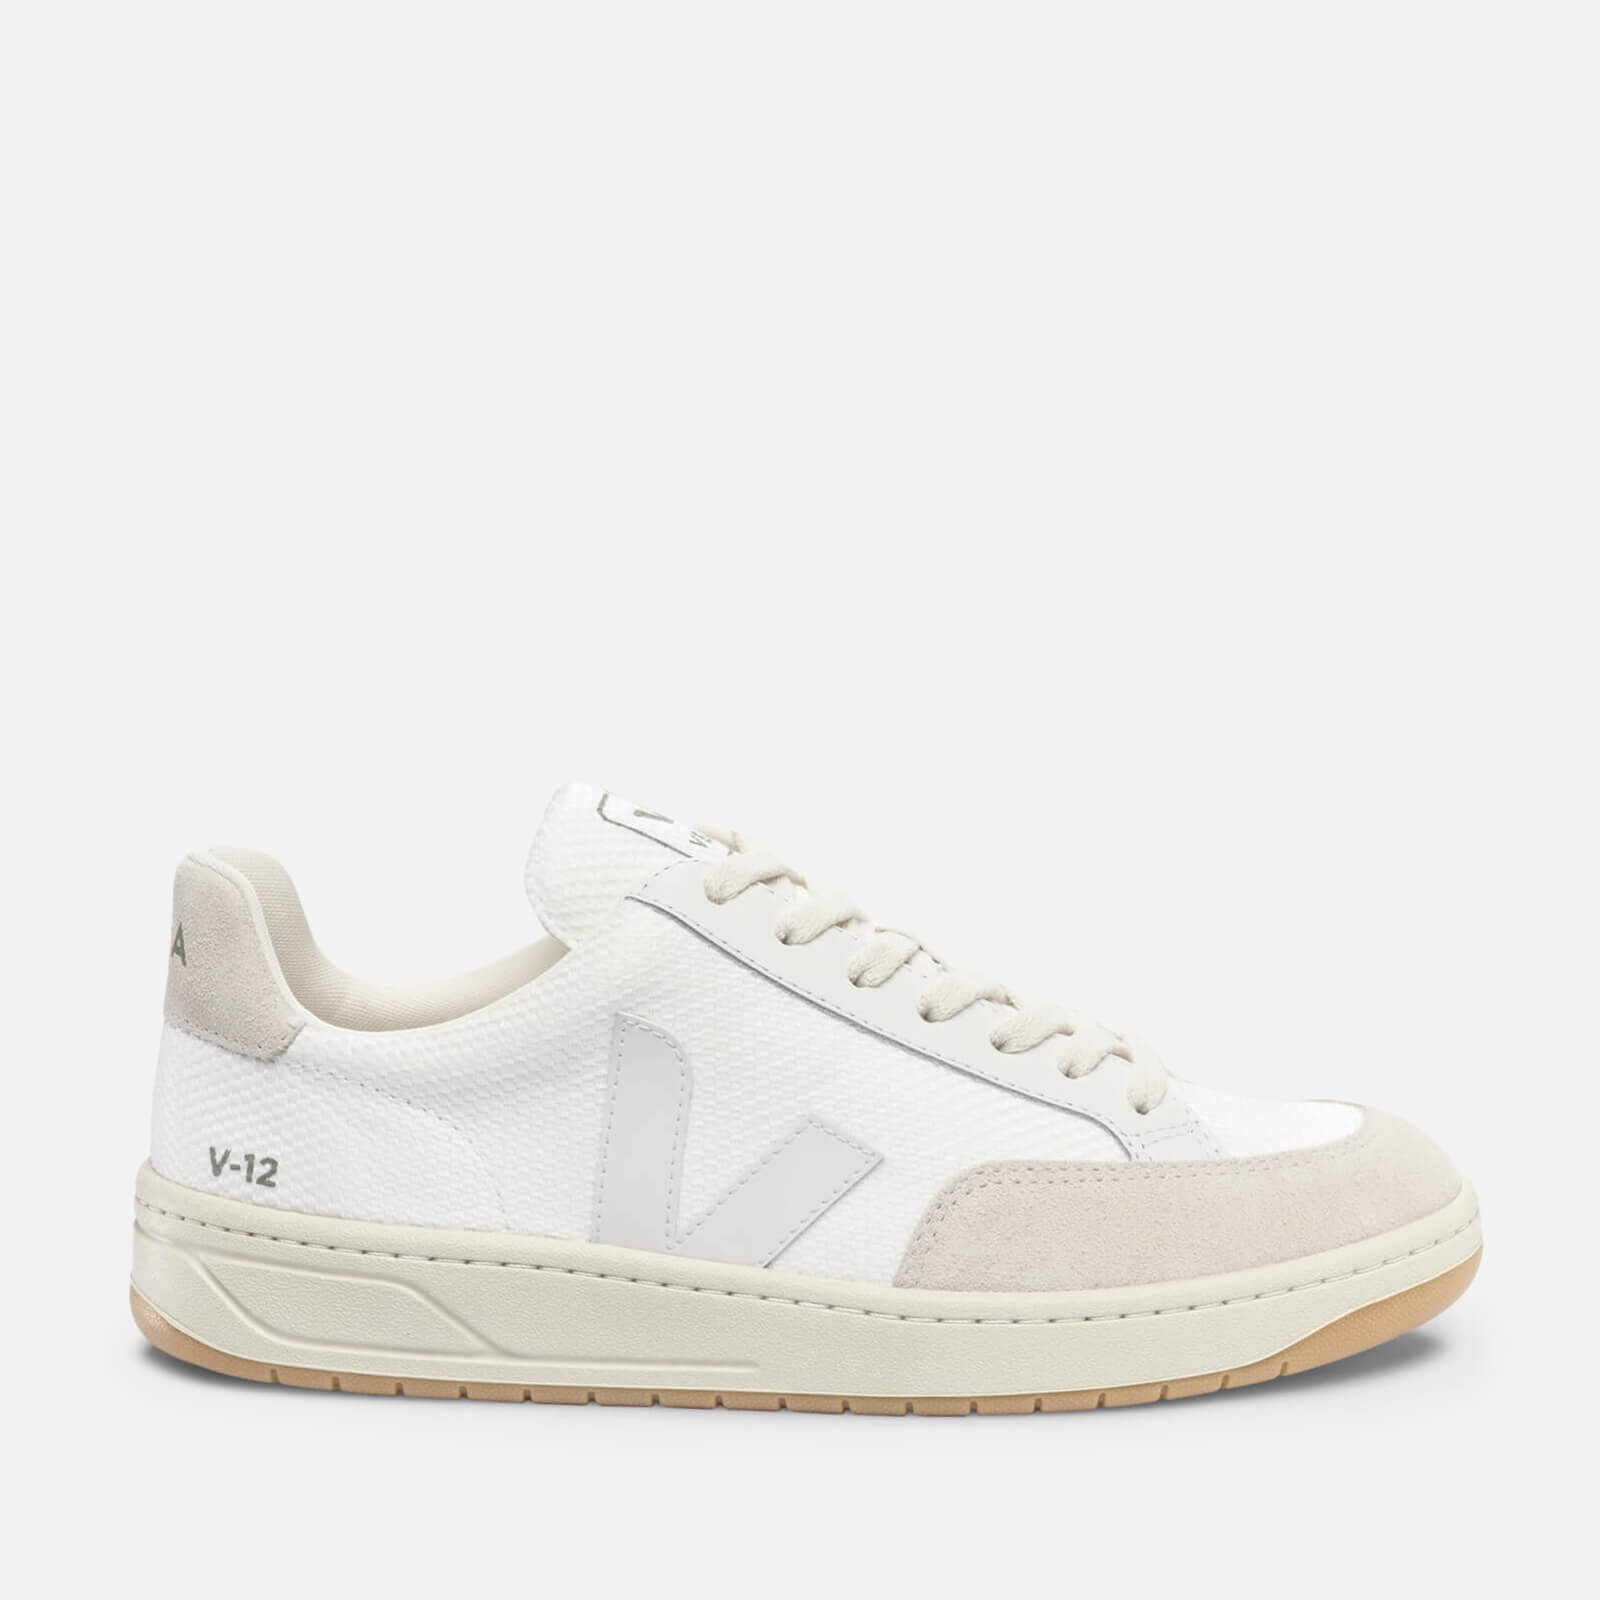 Veja Men’s V-12 B Mesh and Suede Trainers - UK 8